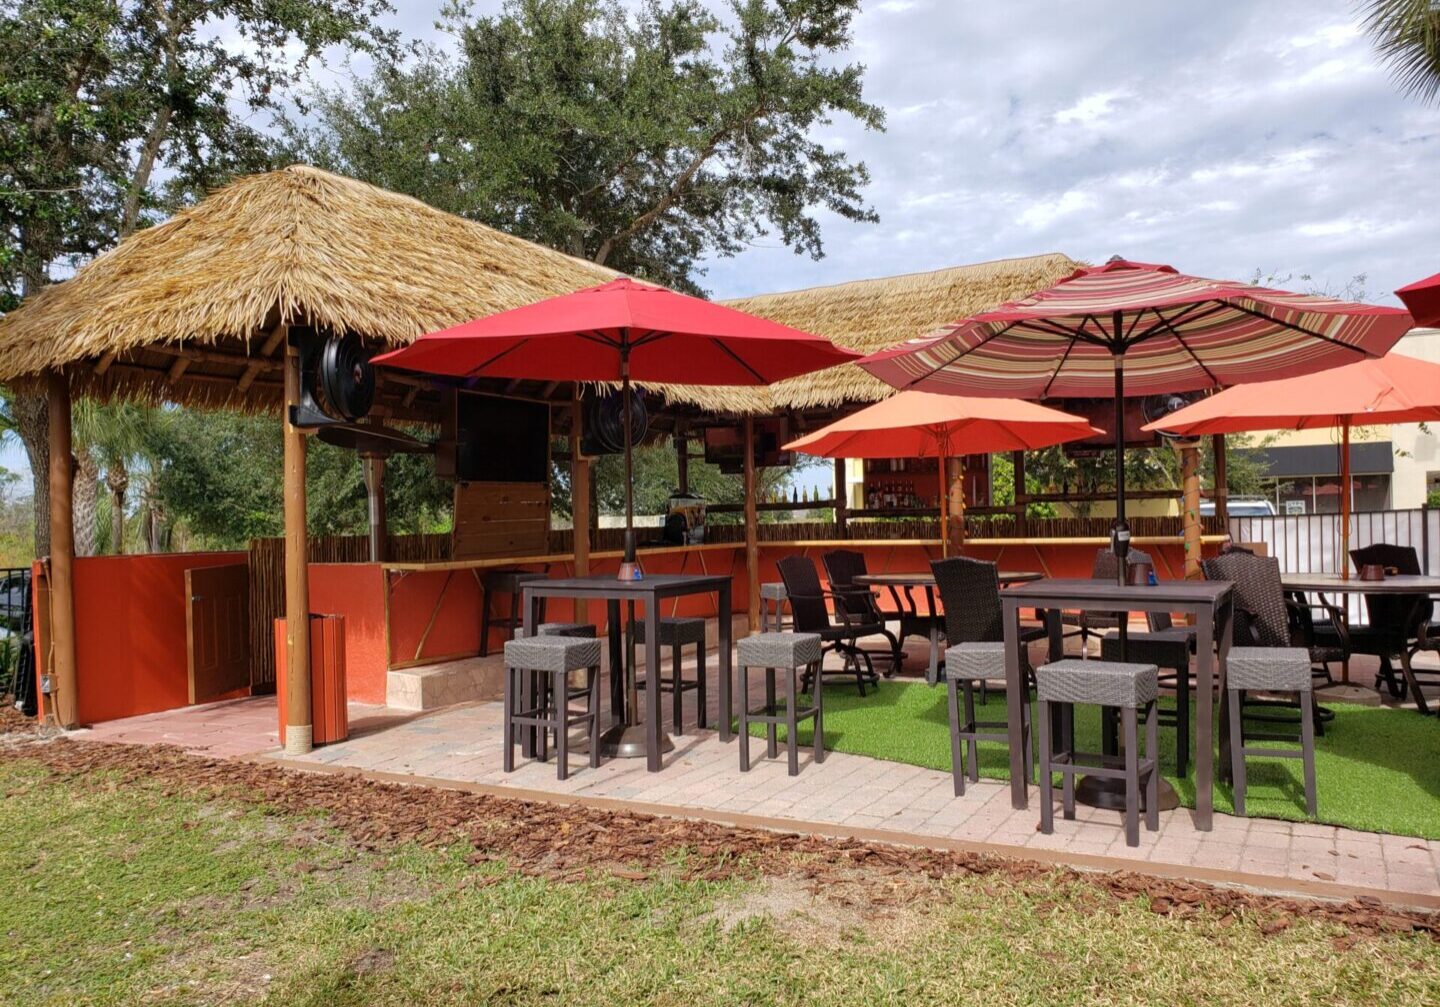 A tiki hut and bar with tables and chairs